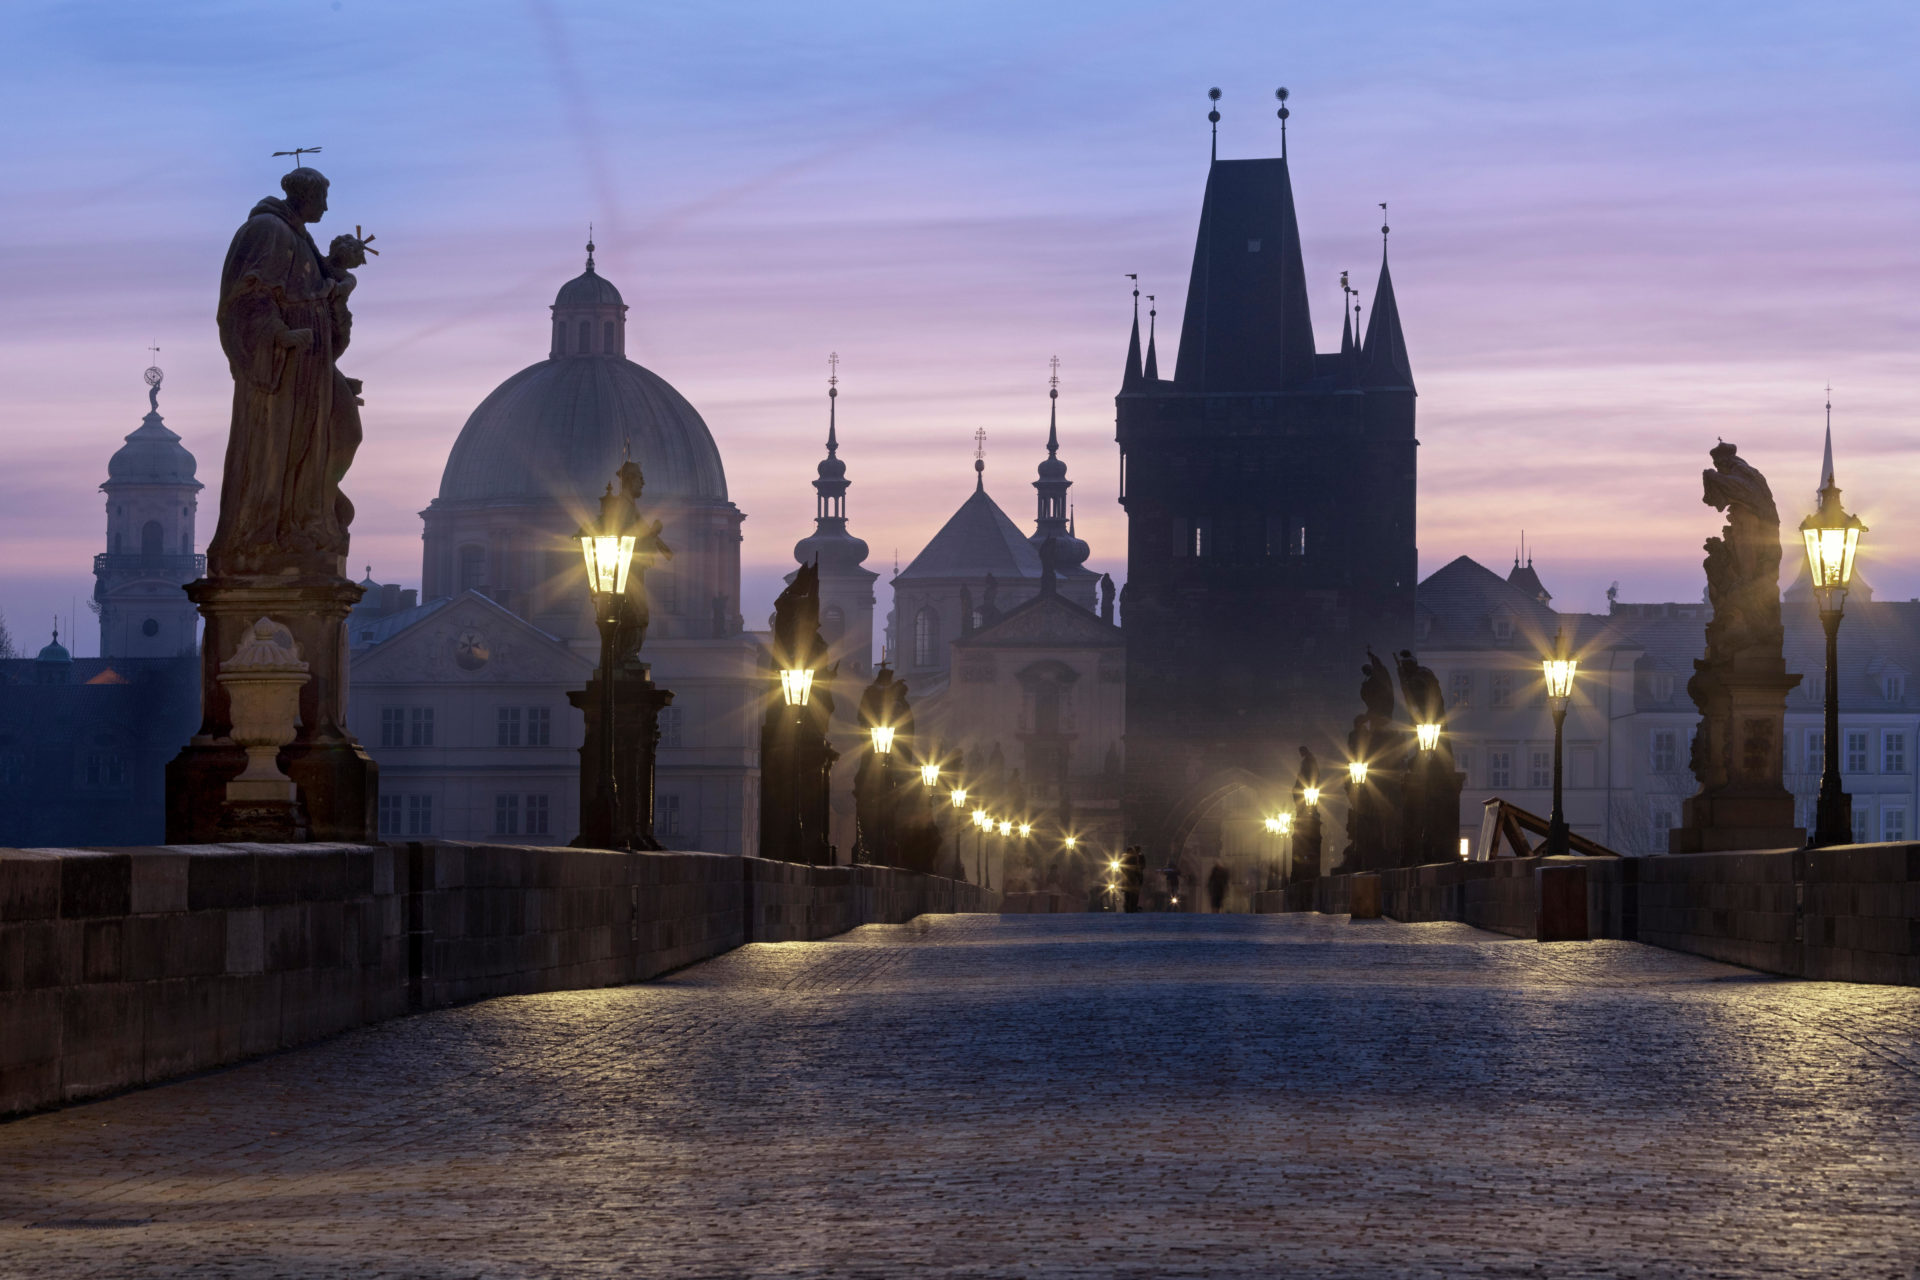 Street lanterns and old statues frame the historical buildings on Charles Bridge at dawn, UNESCO, Prague, Czech Republic